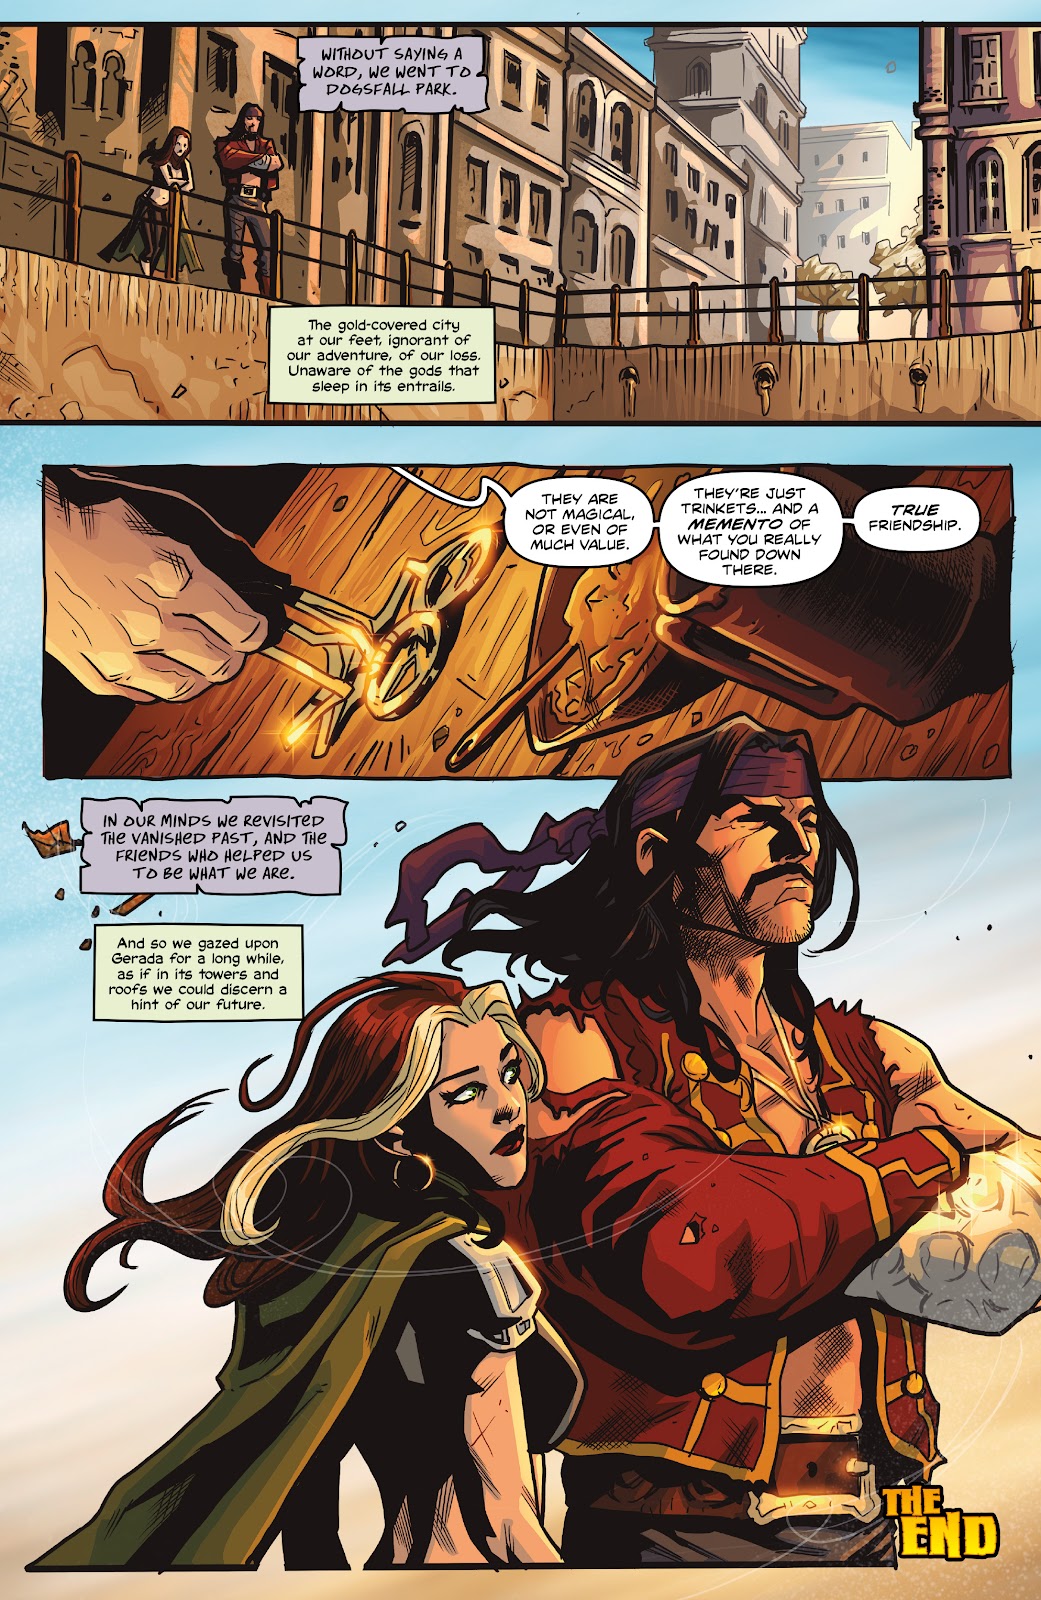 Rogues!: The Burning Heart issue 5 - Page 23